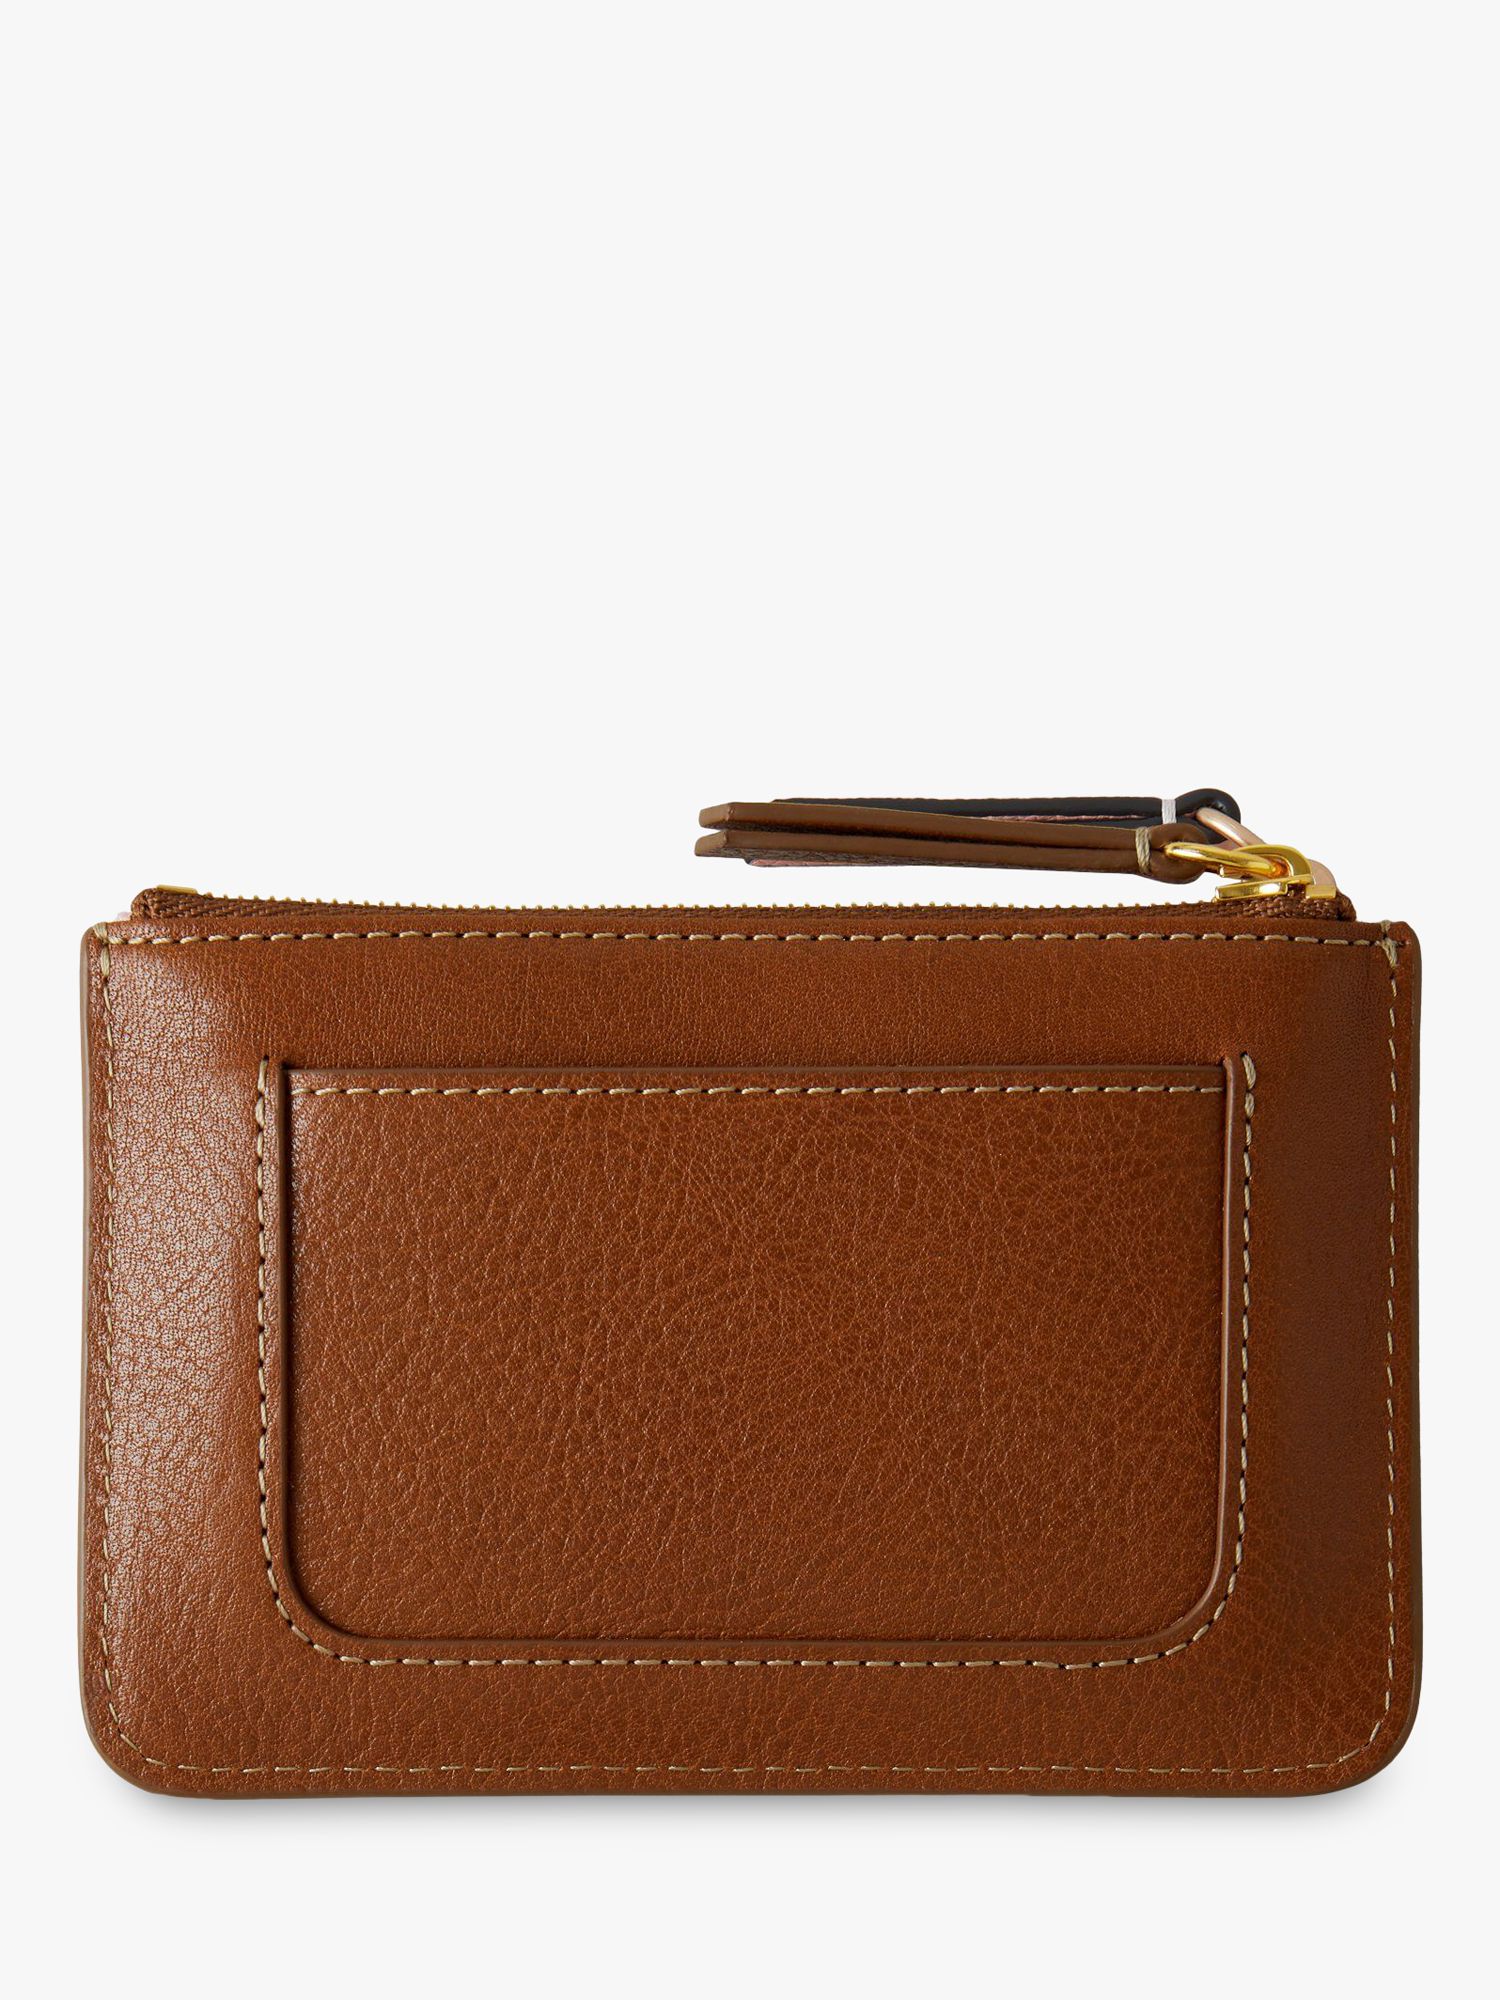 Buy Mulberry Plaque Legacy Natural Vegetable Tan Leather Zip Top Coin Pouch, Oak Online at johnlewis.com